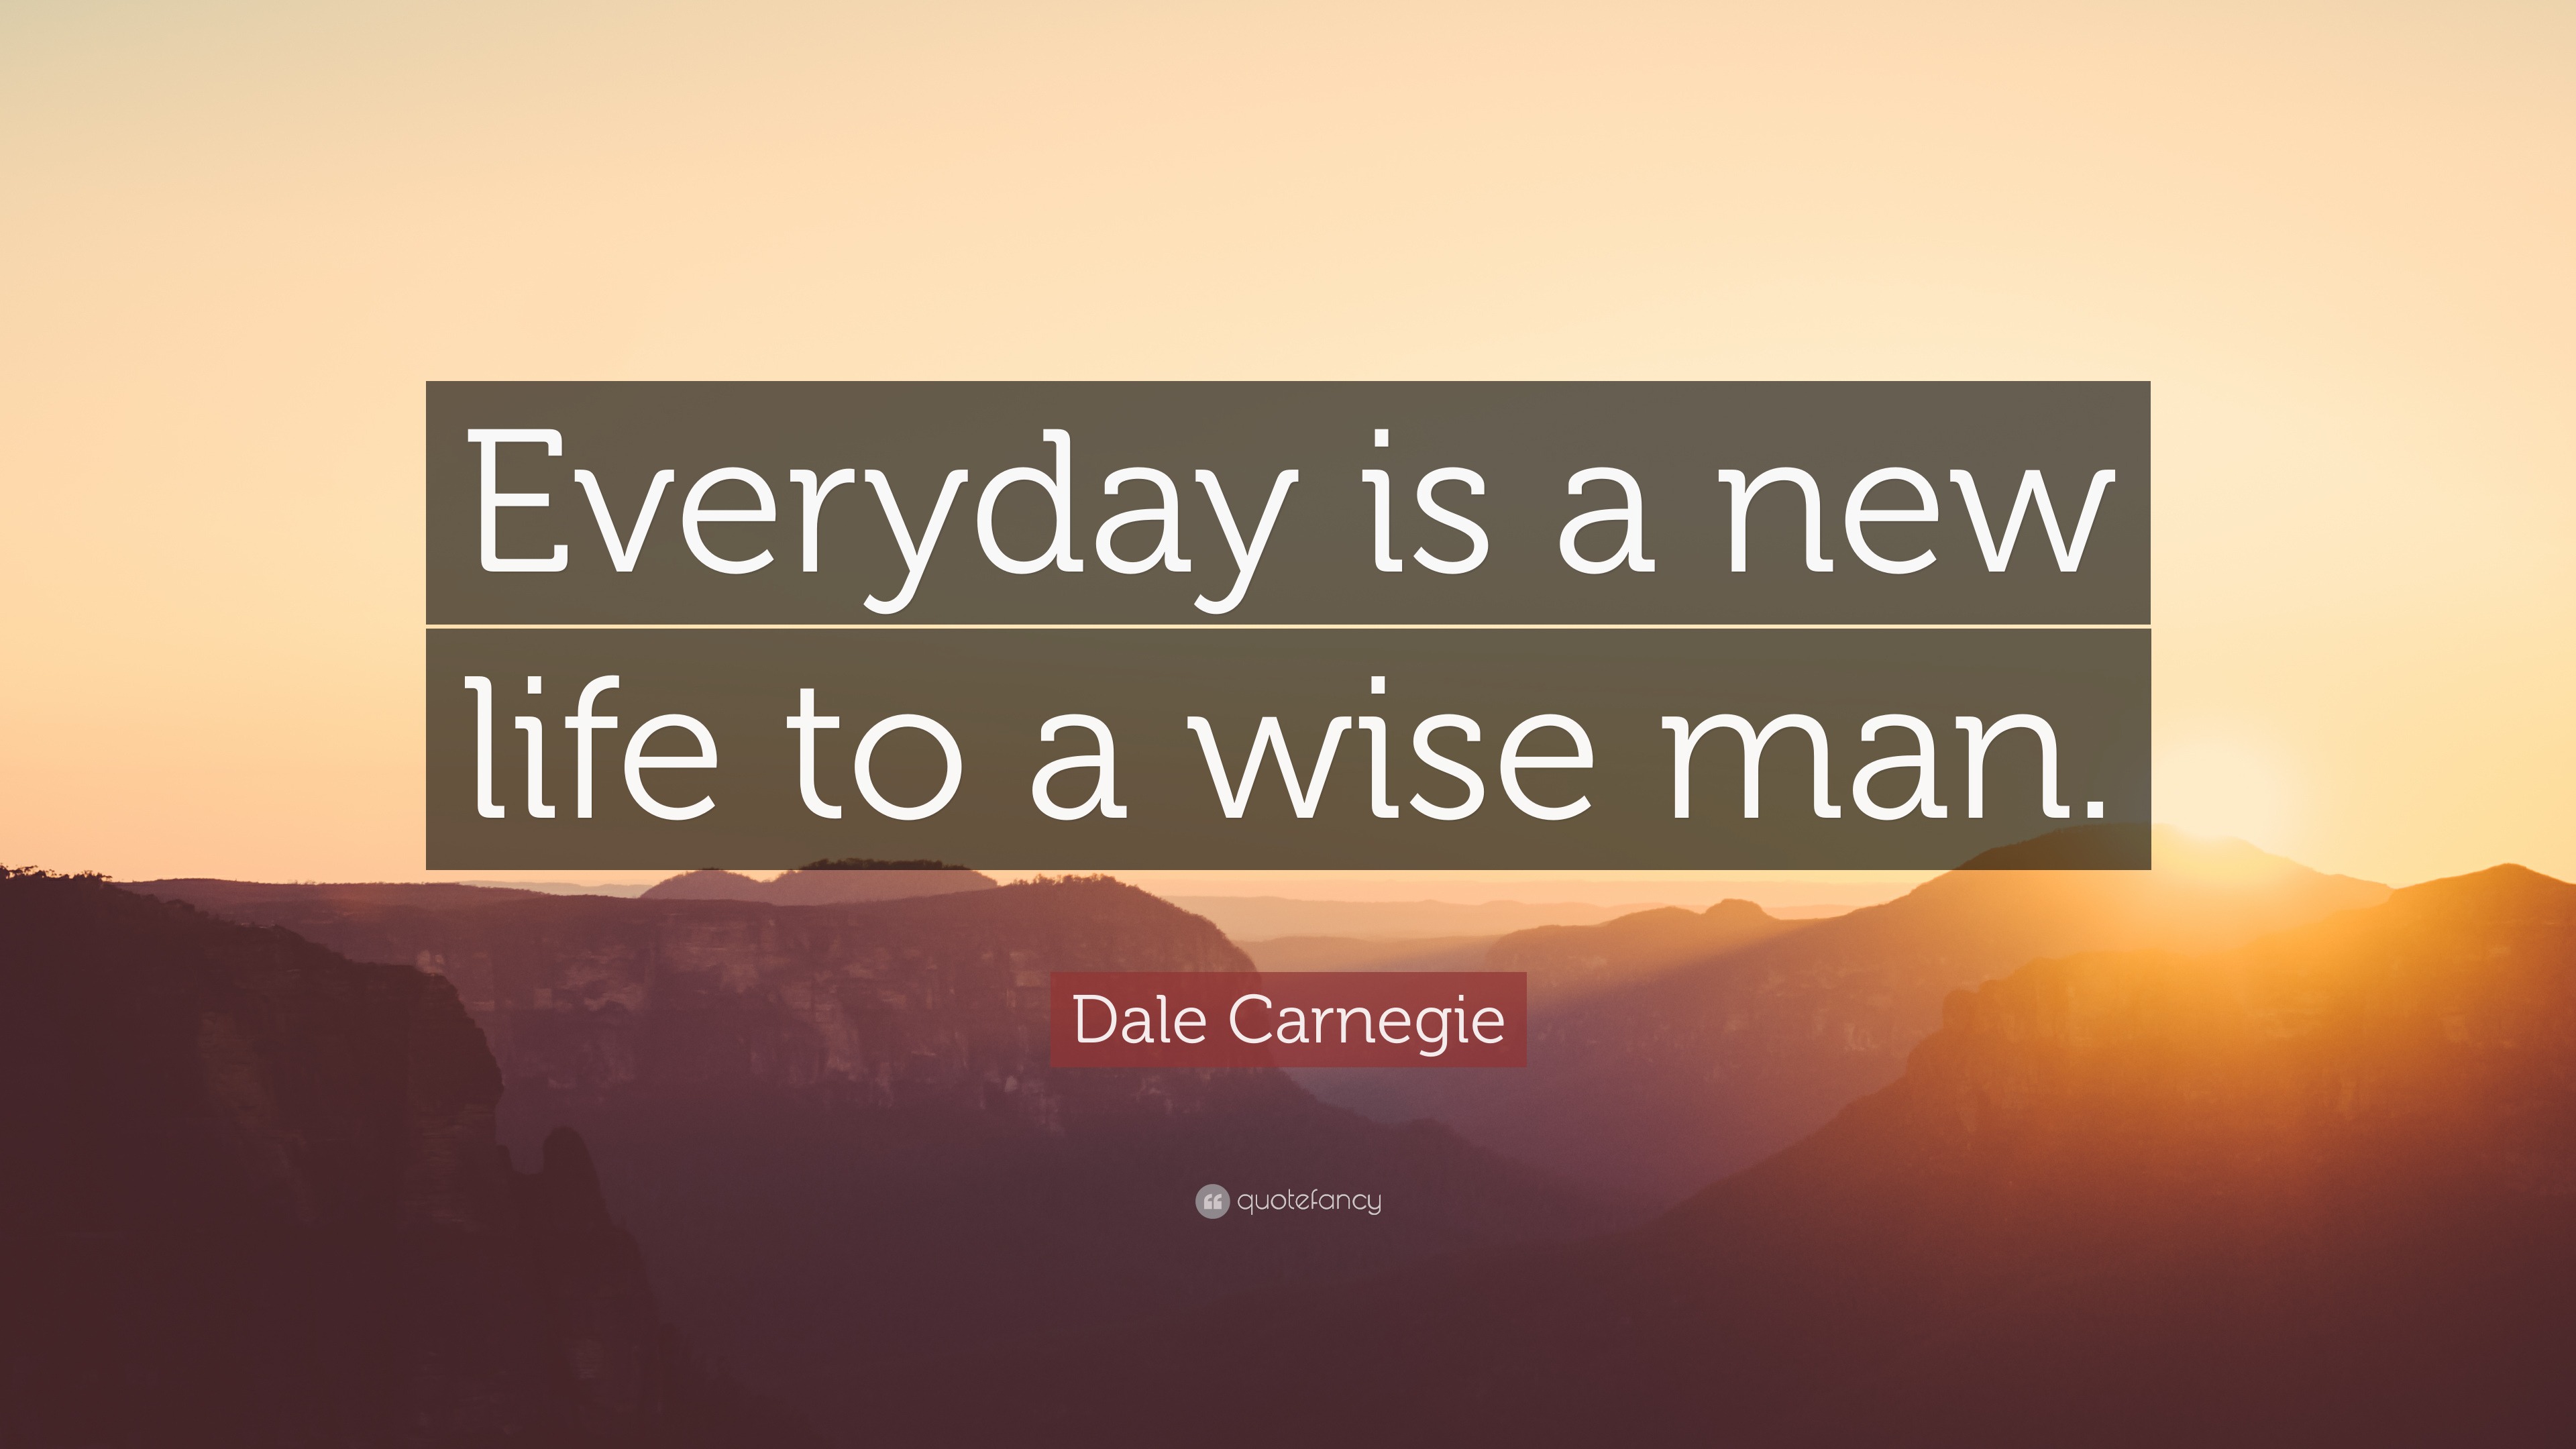 Dale Carnegie Quote “Everyday is a new life to a wise man ”